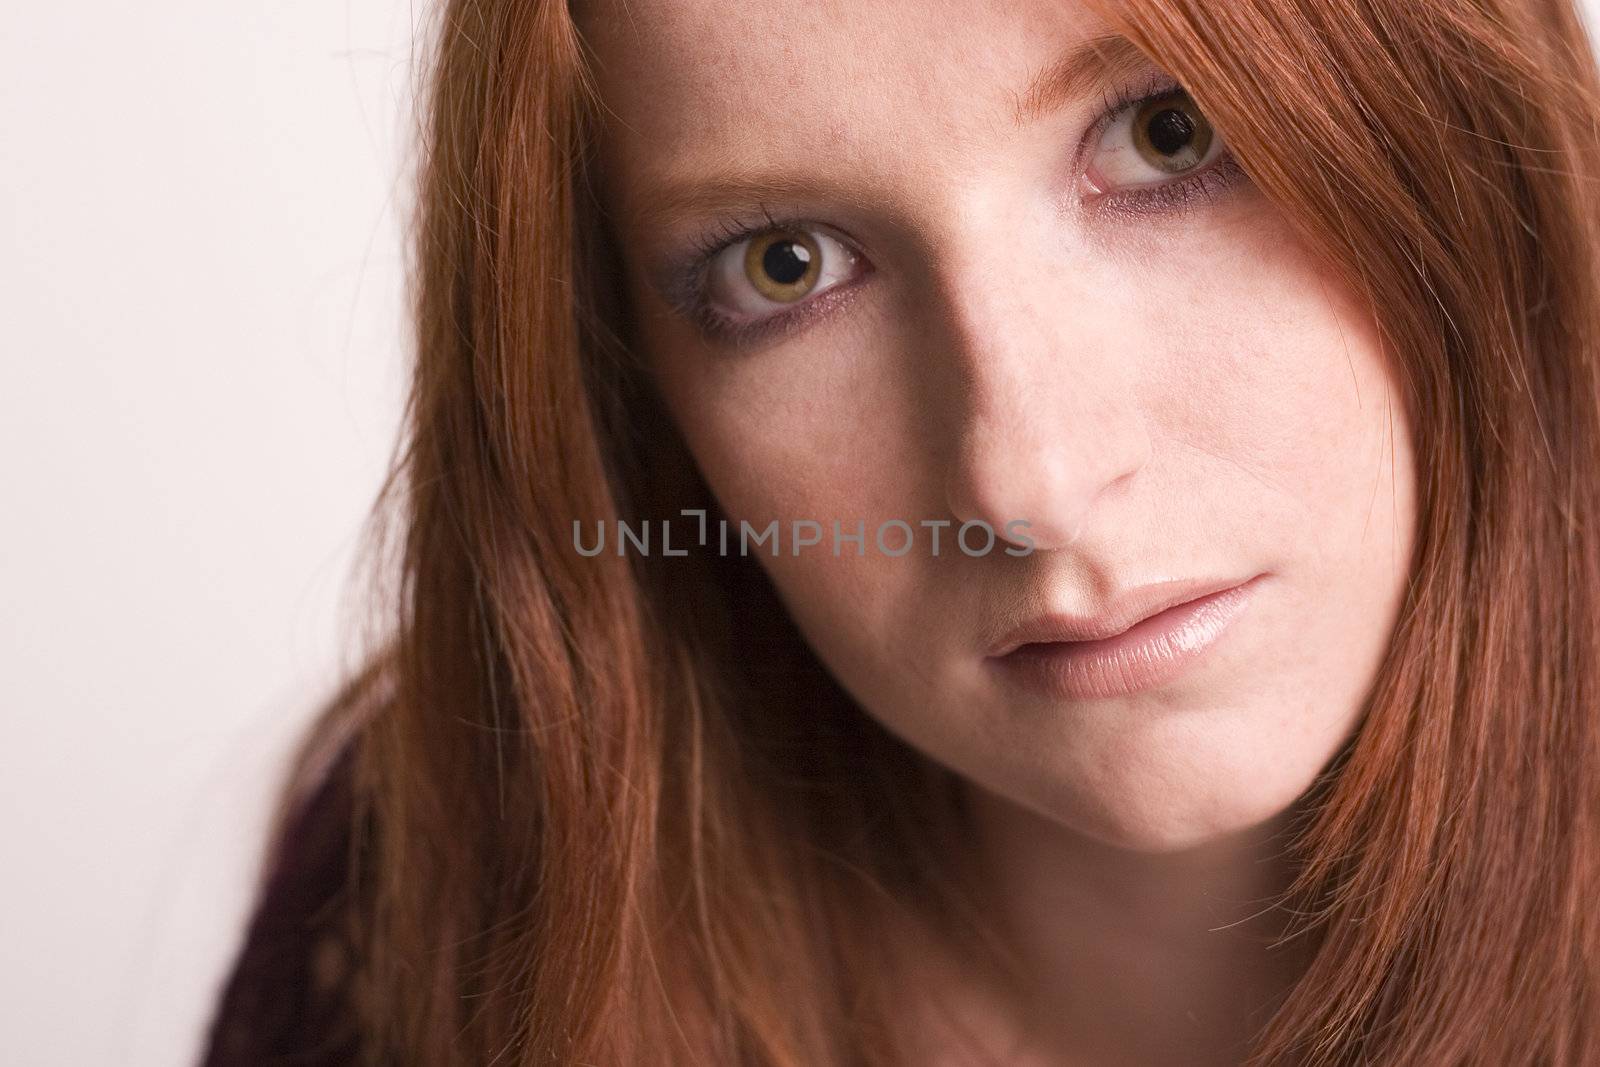 Studio portrait of a natural redhead looking thoughtful